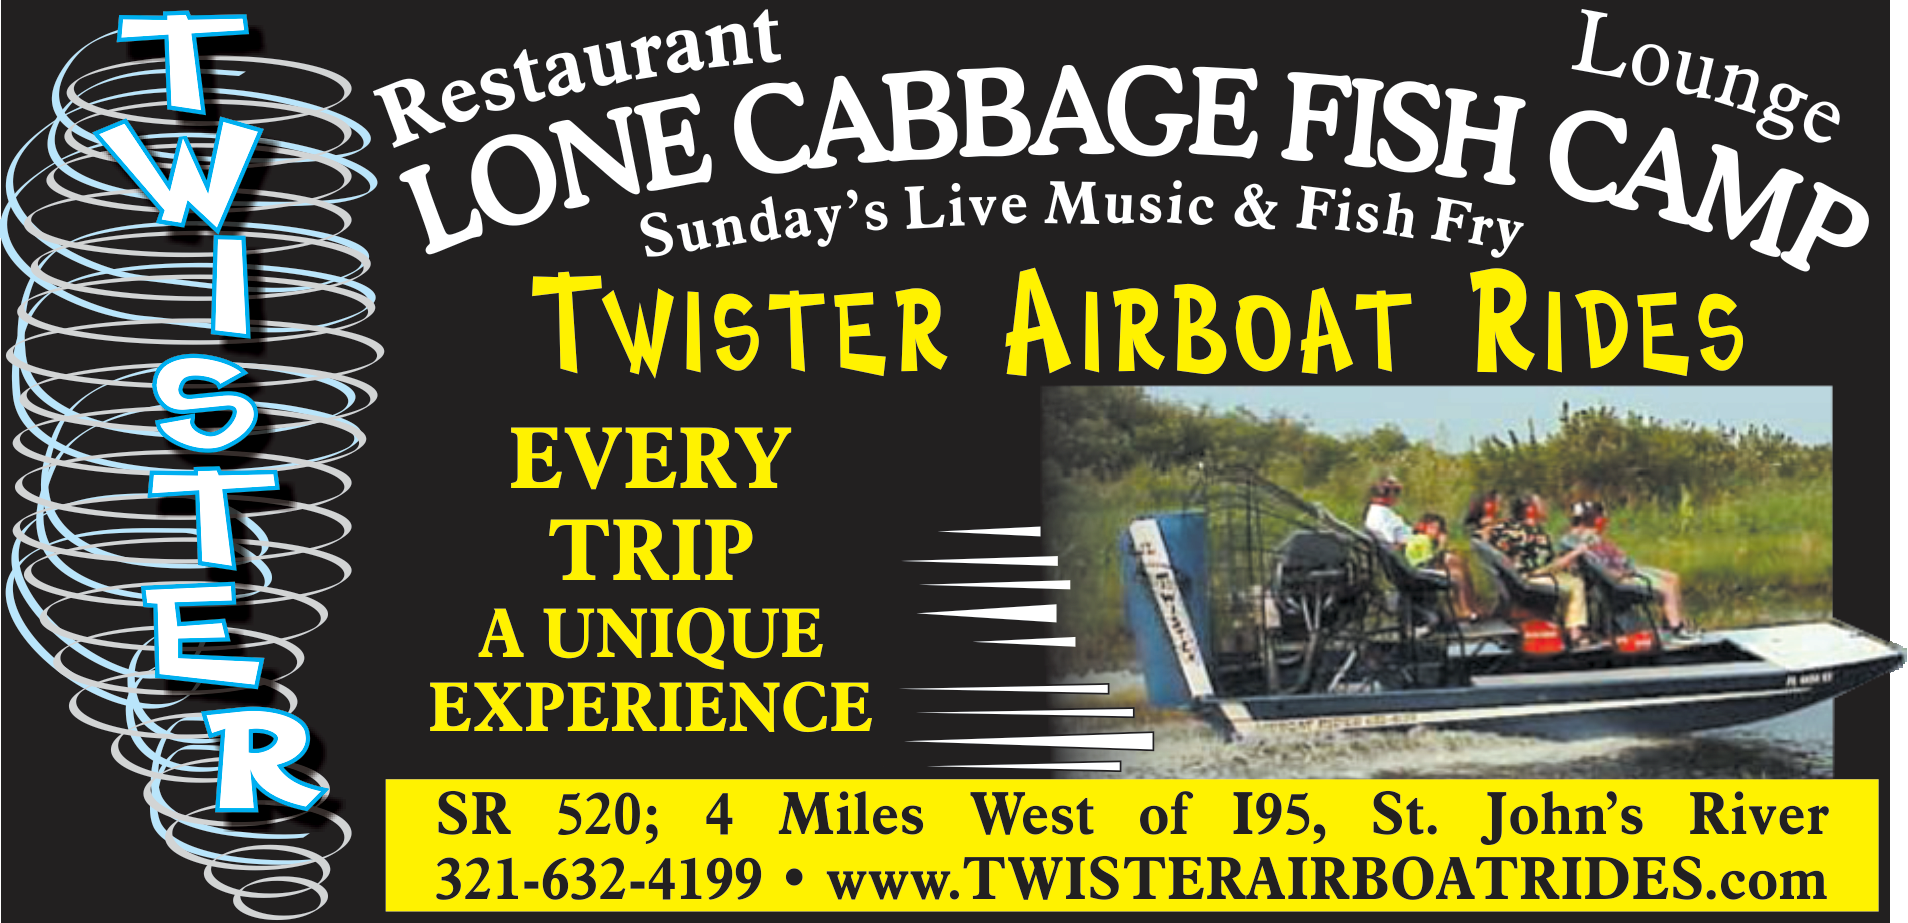 Lone Cabbage Fish Camp - Twister Airboat Rides Print Ad